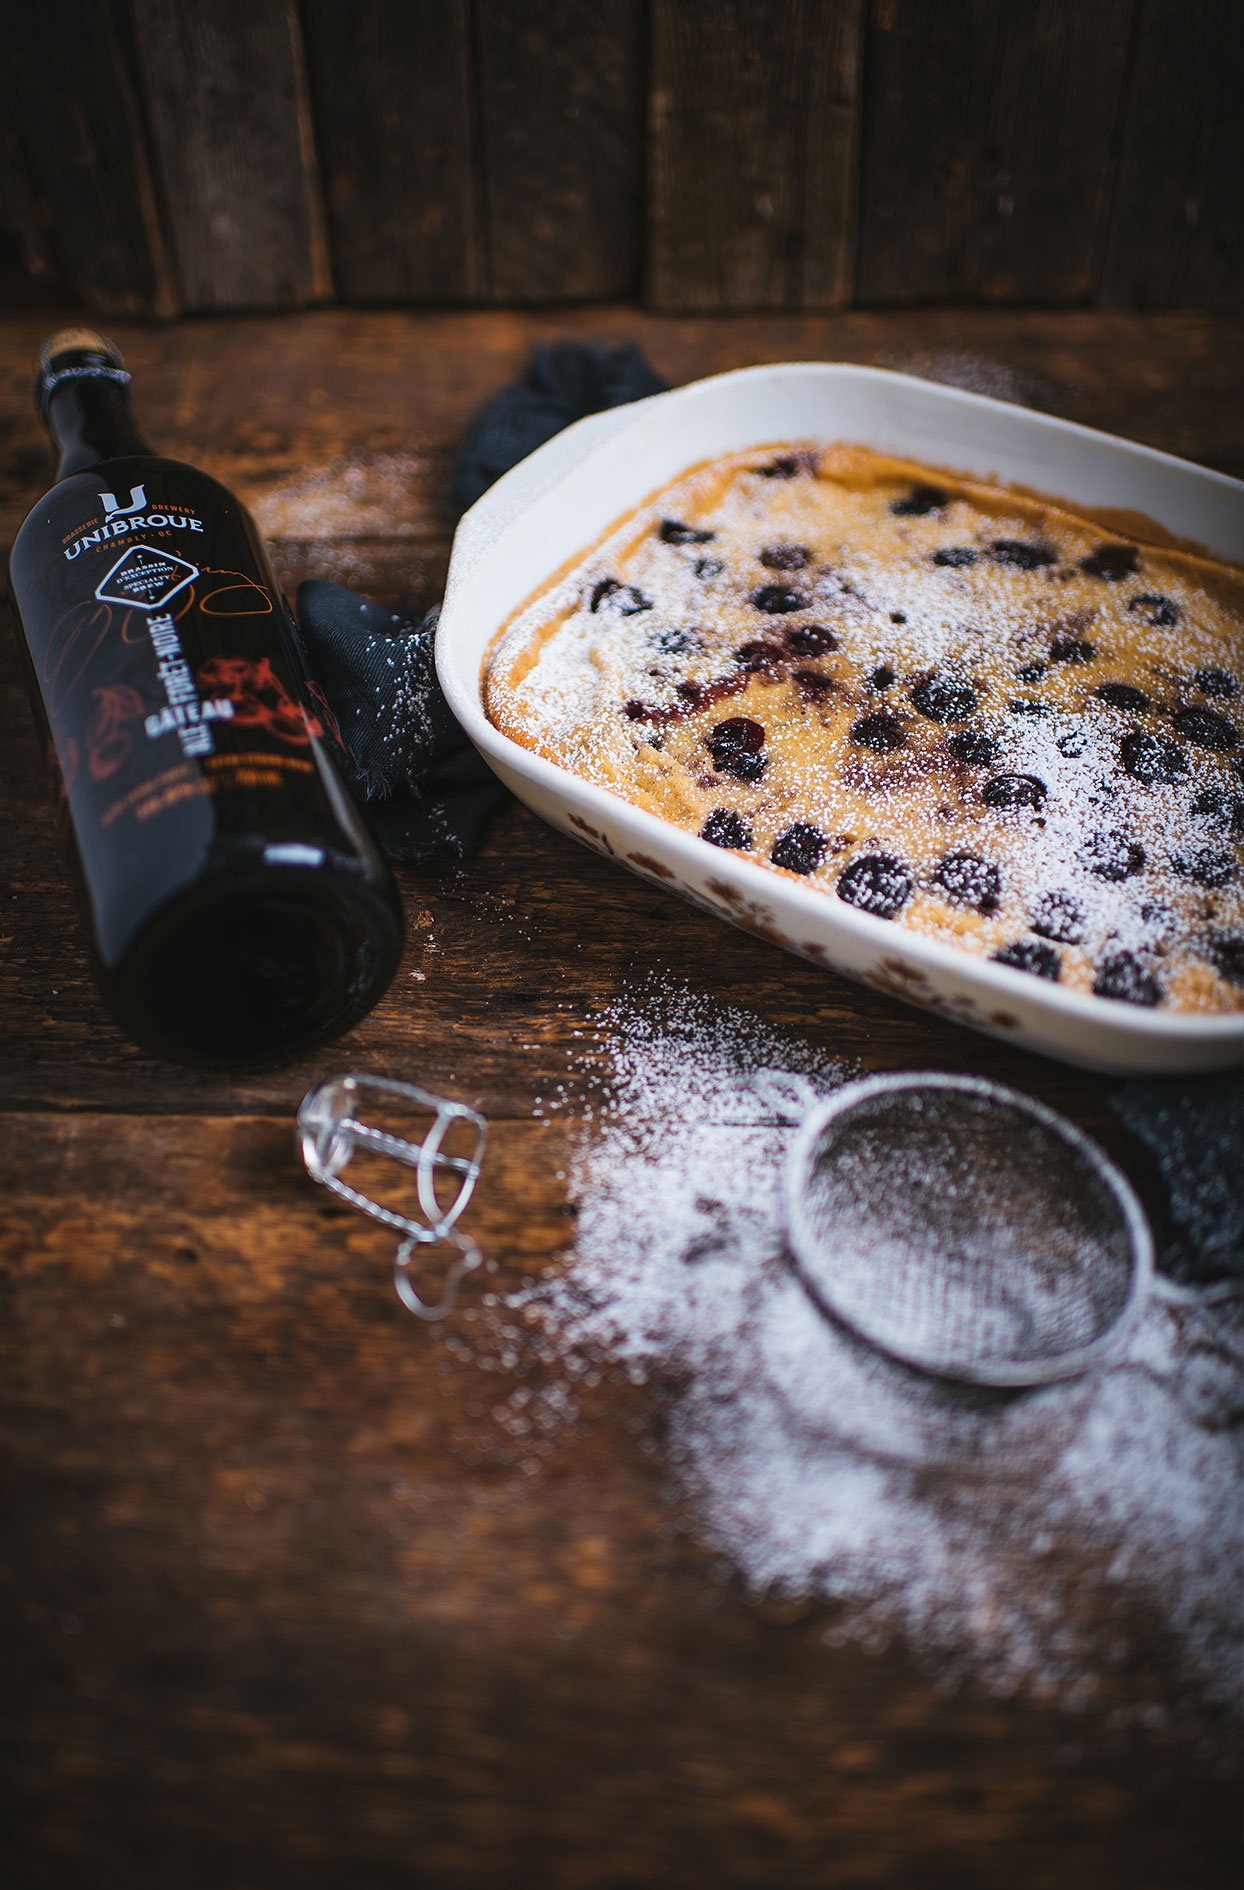 Cherry clafoutis with Black Forest ale beer